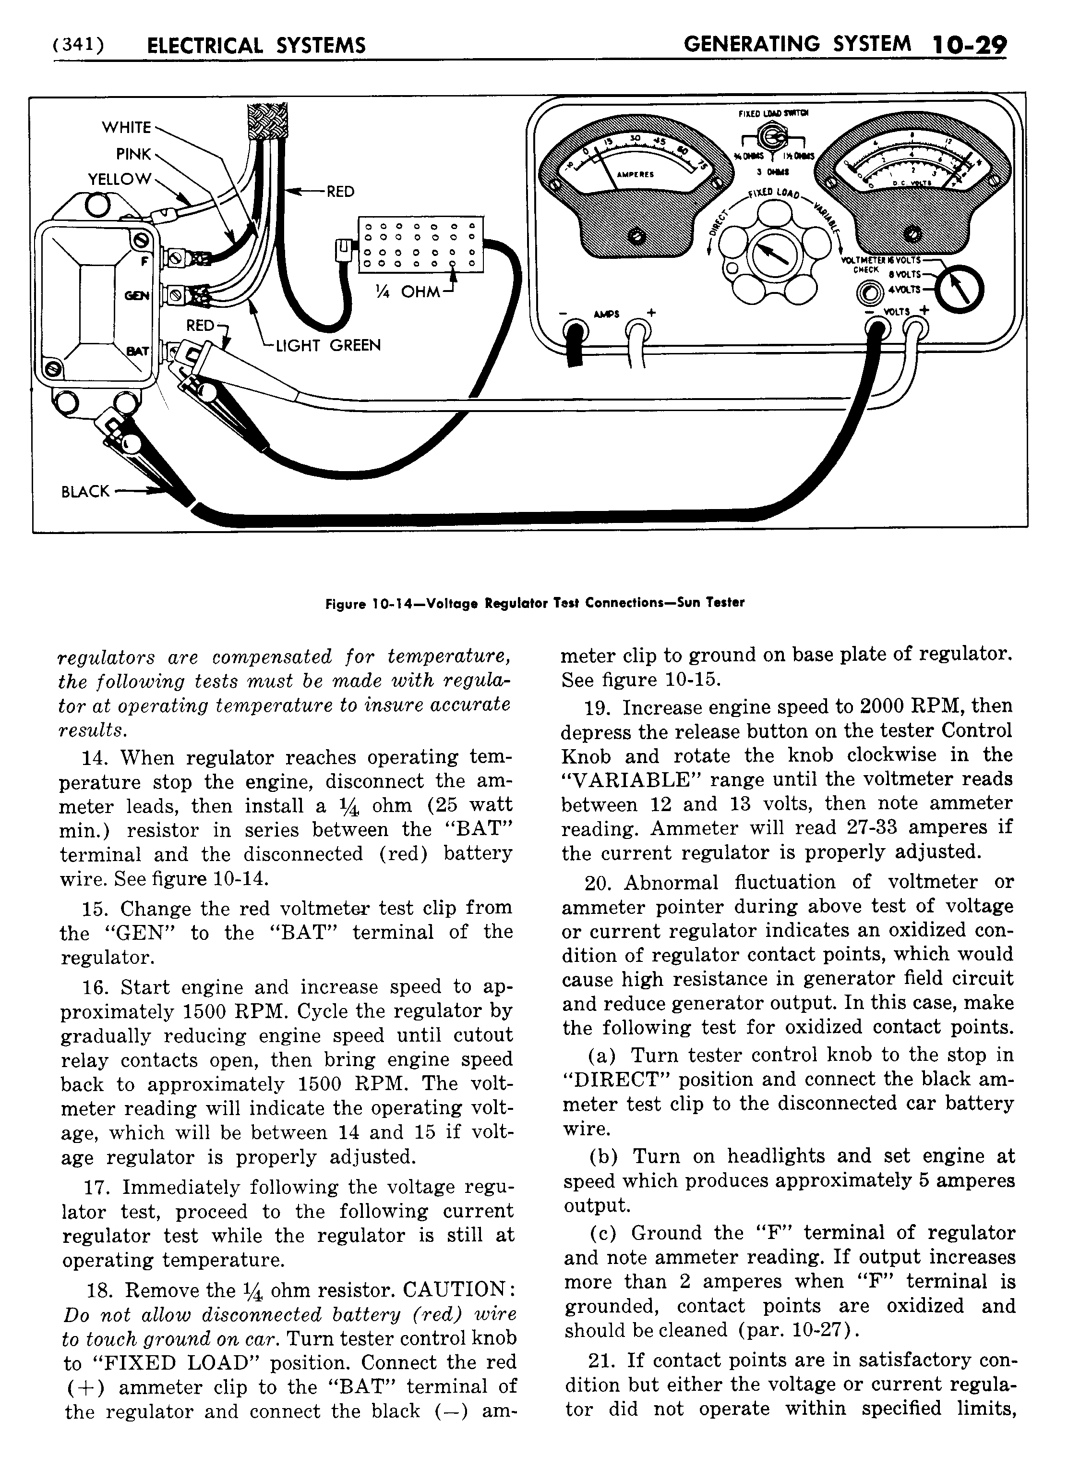 n_11 1954 Buick Shop Manual - Electrical Systems-029-029.jpg